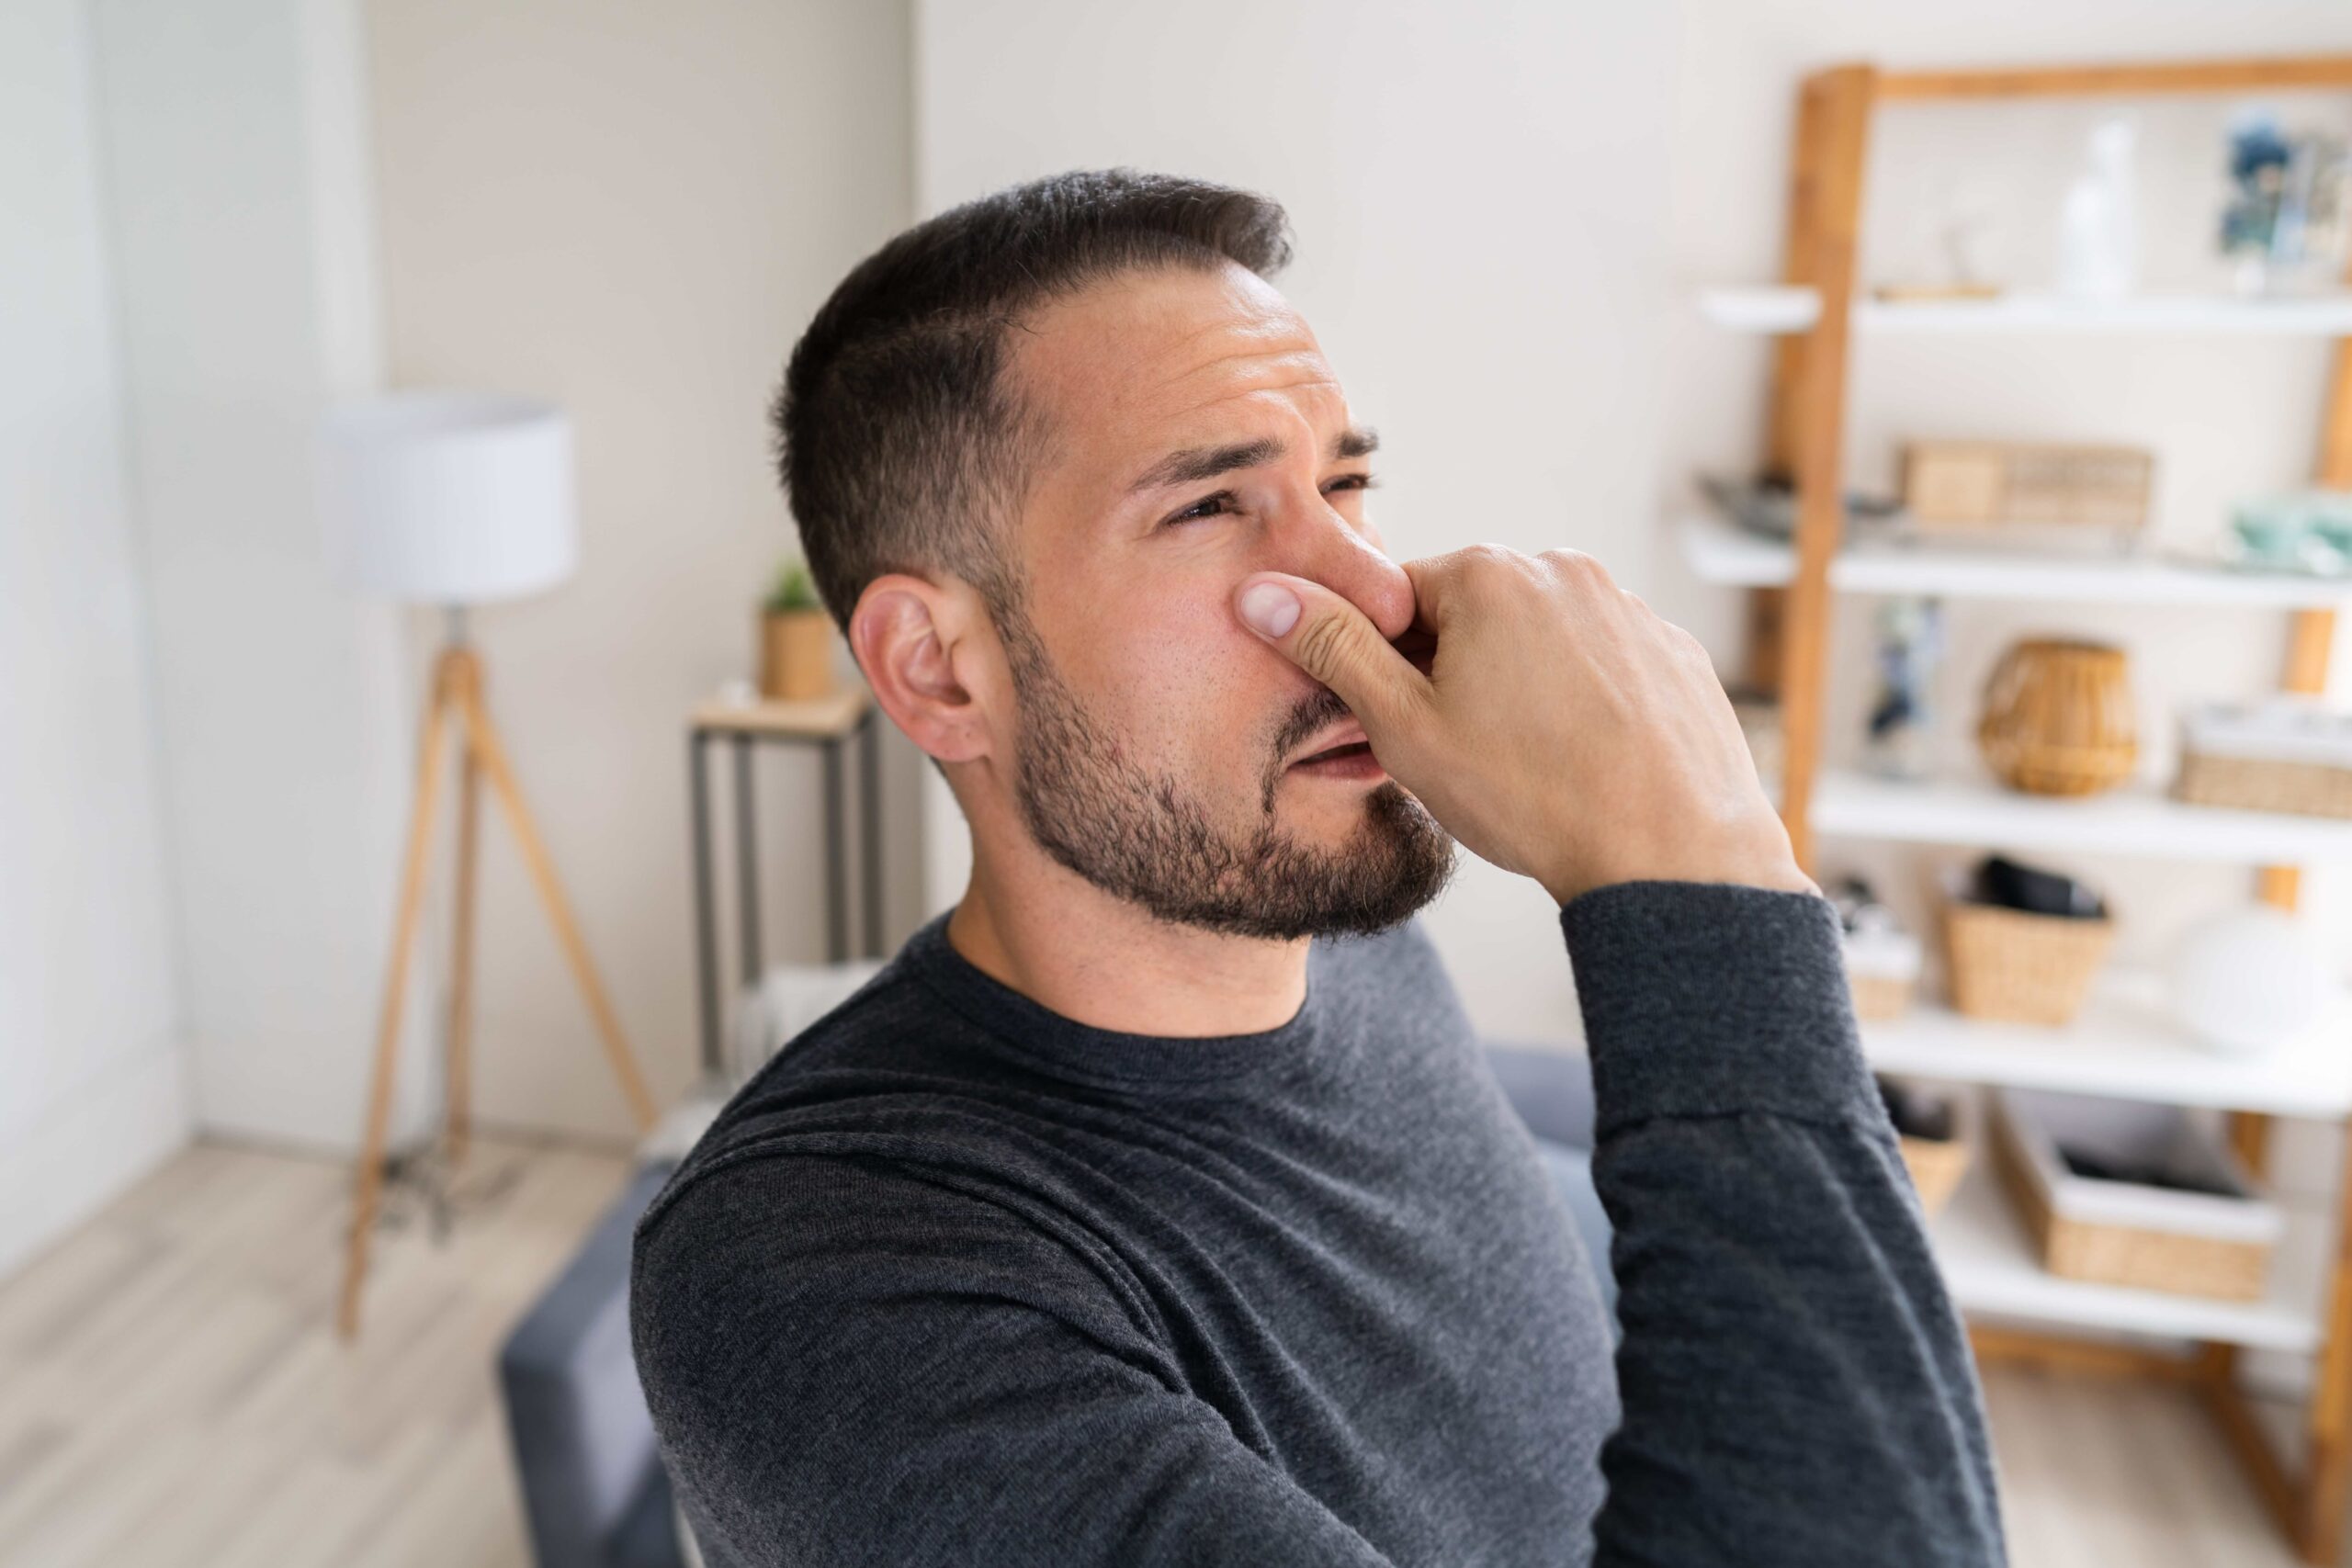 Man plugging his nose because of a smell